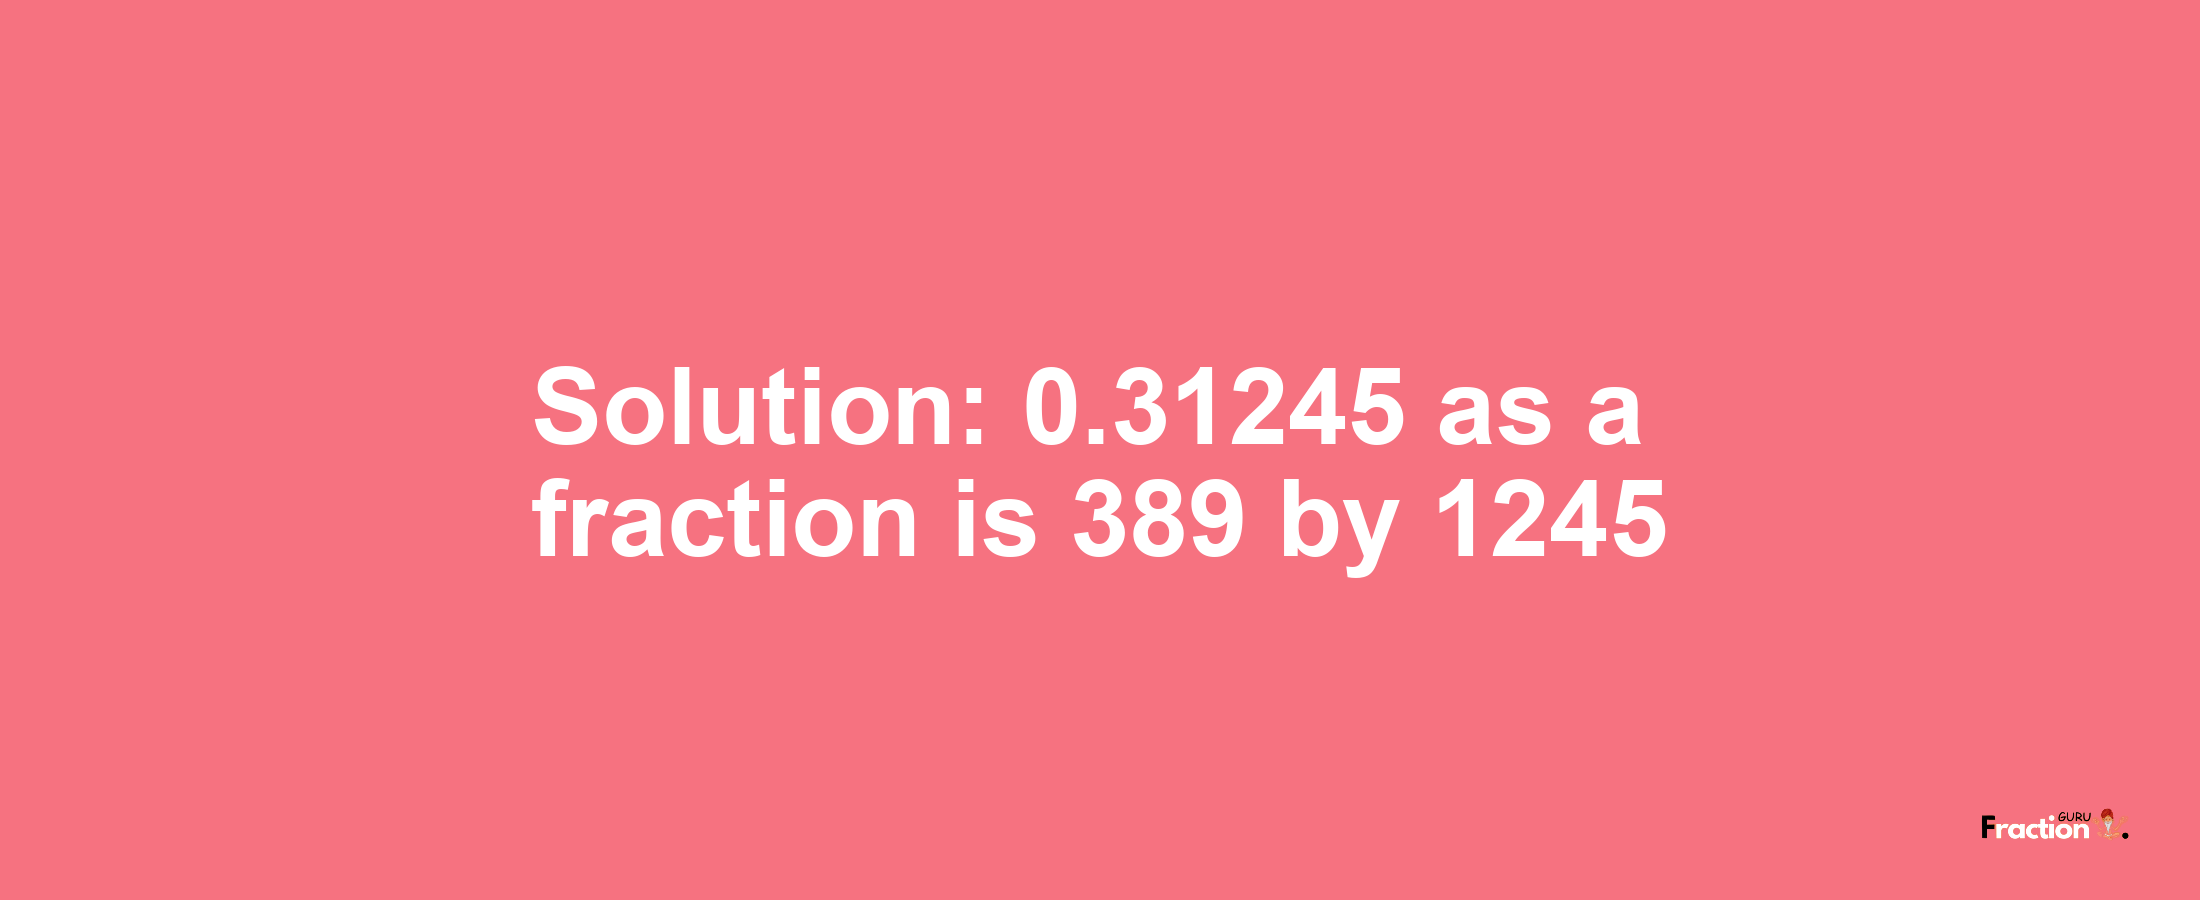 Solution:0.31245 as a fraction is 389/1245